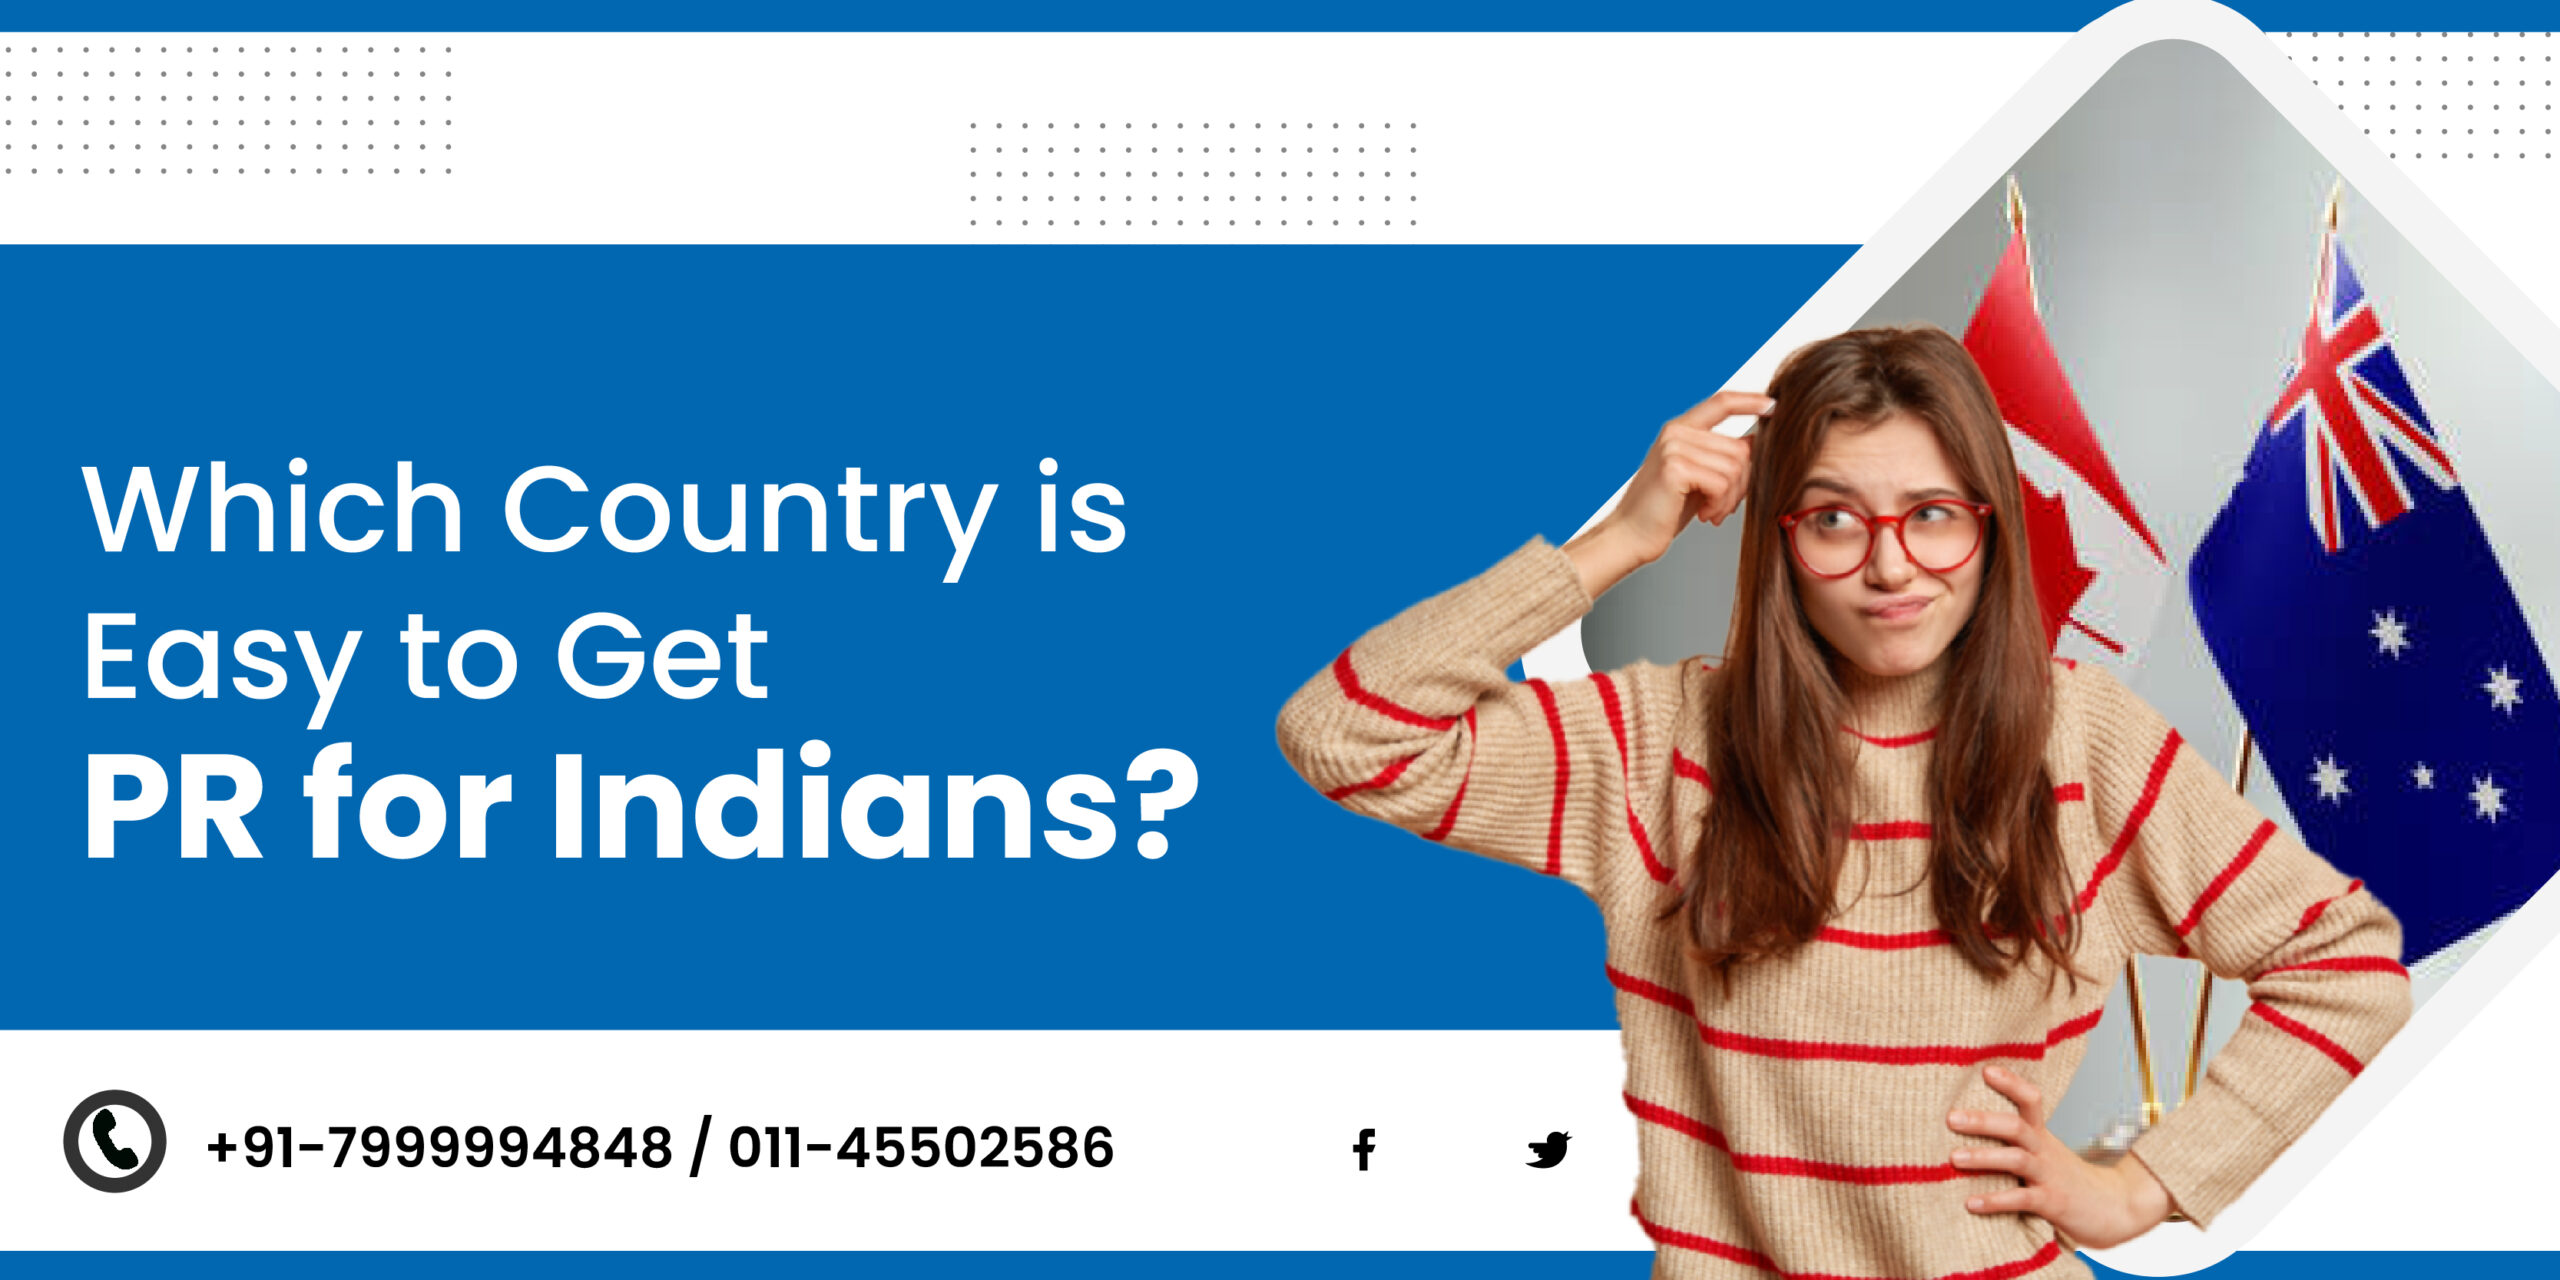 Which country is easy to get PR for Indians?